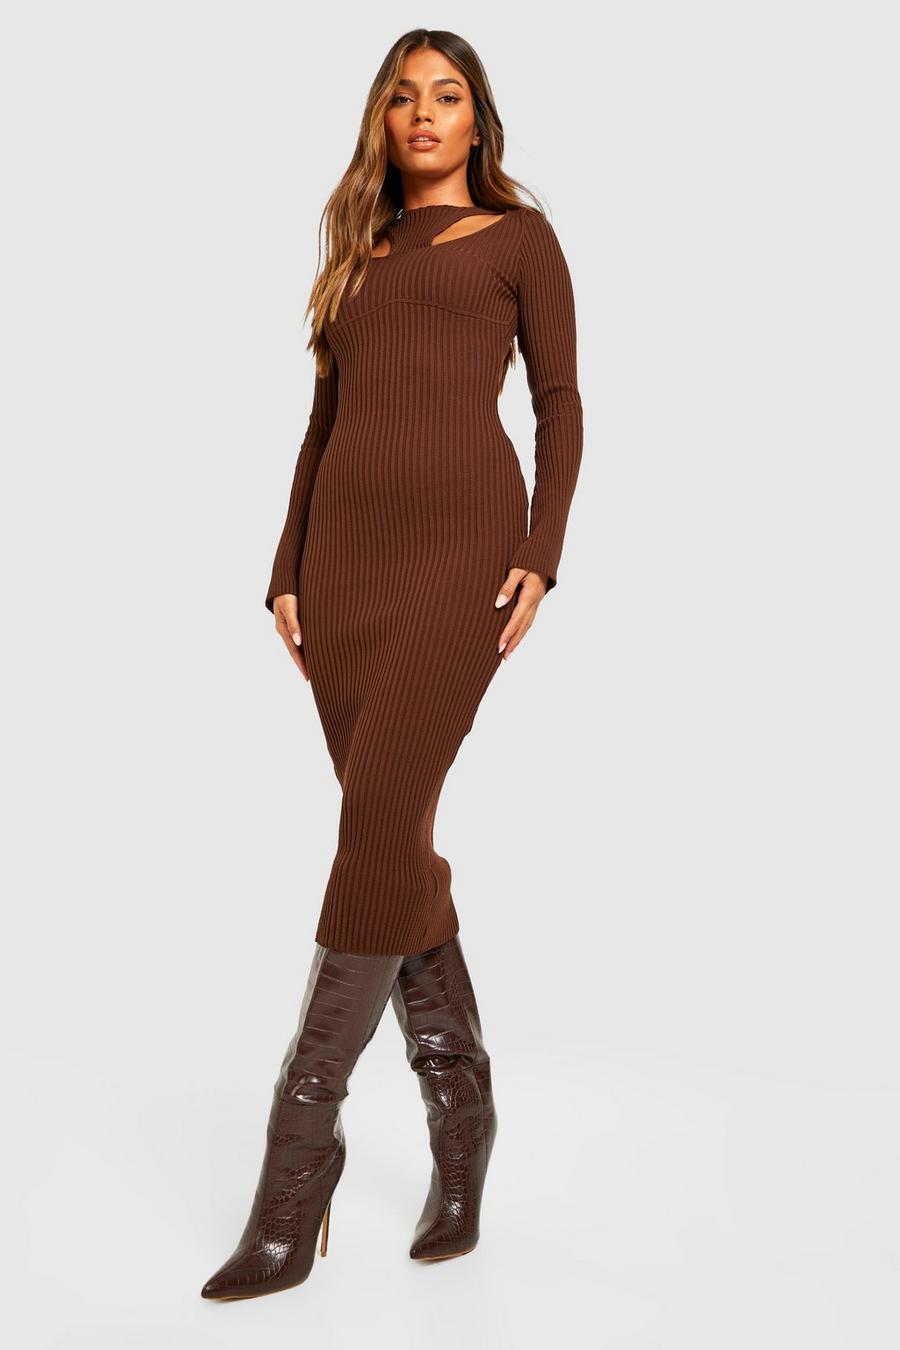 Chocolate marron Cut Out Neckline Rib Knitted Dress